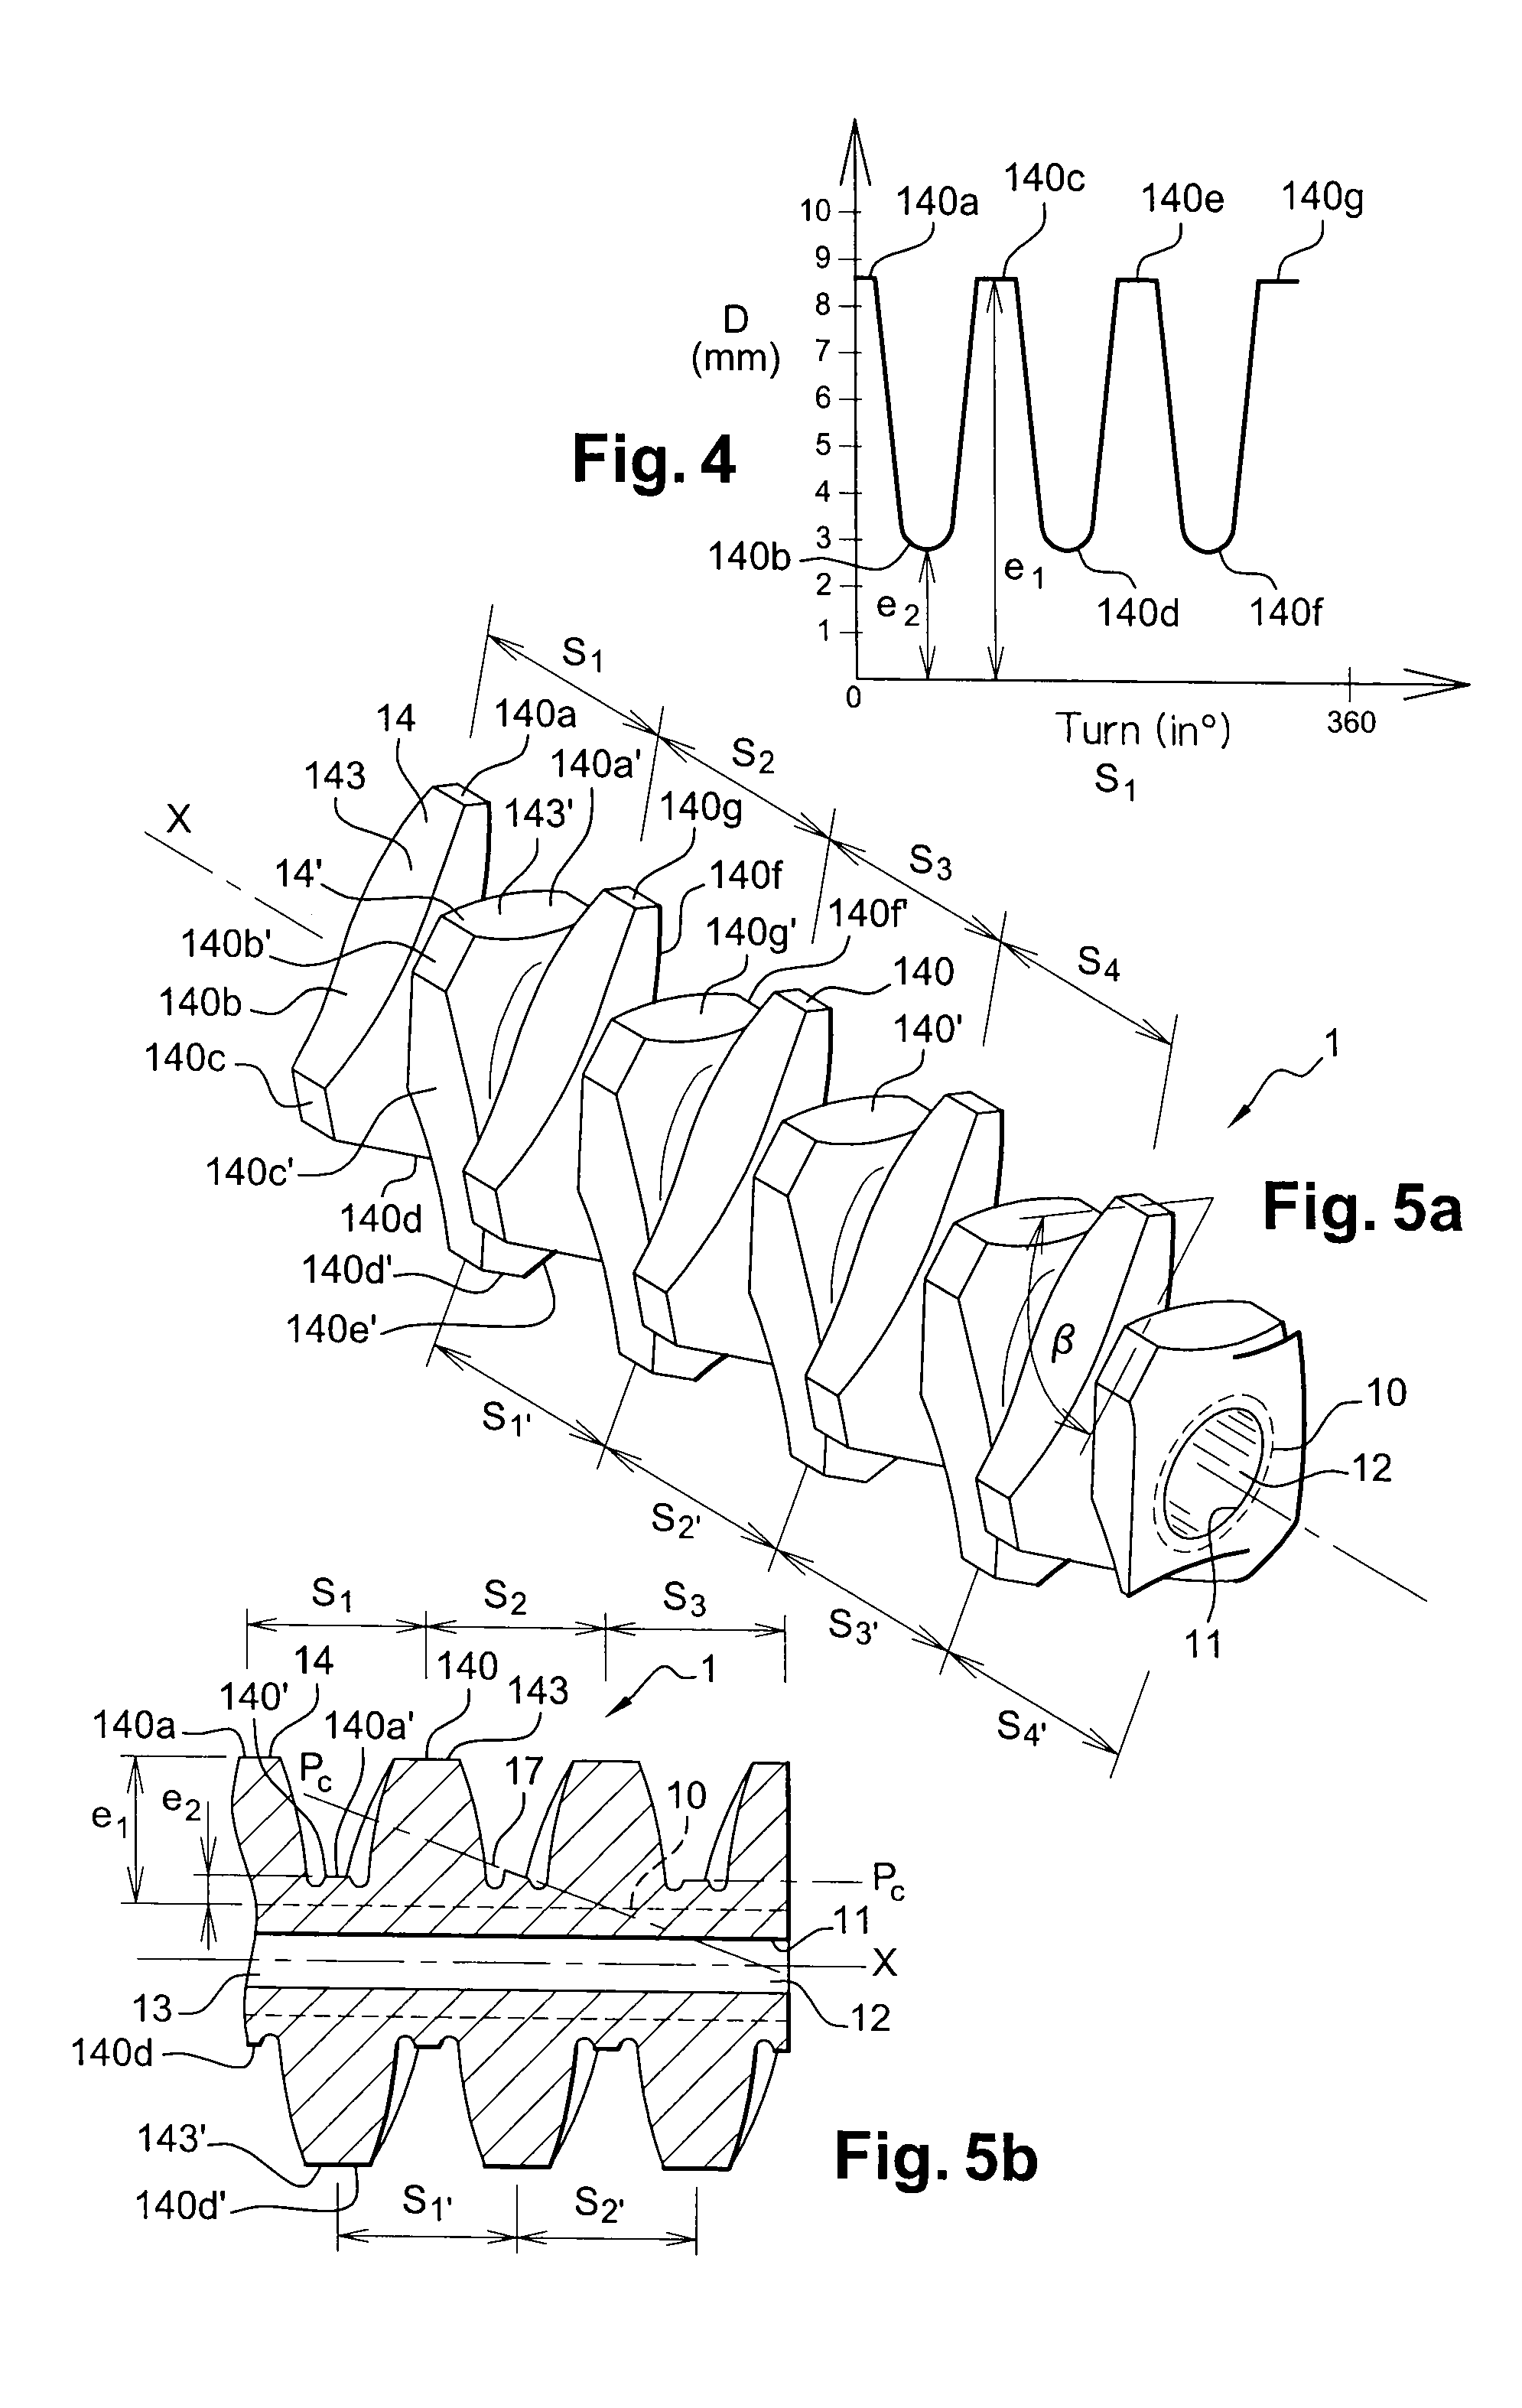 Massage member, massage device and packaging and dispensing assembly incorporating such a massage device